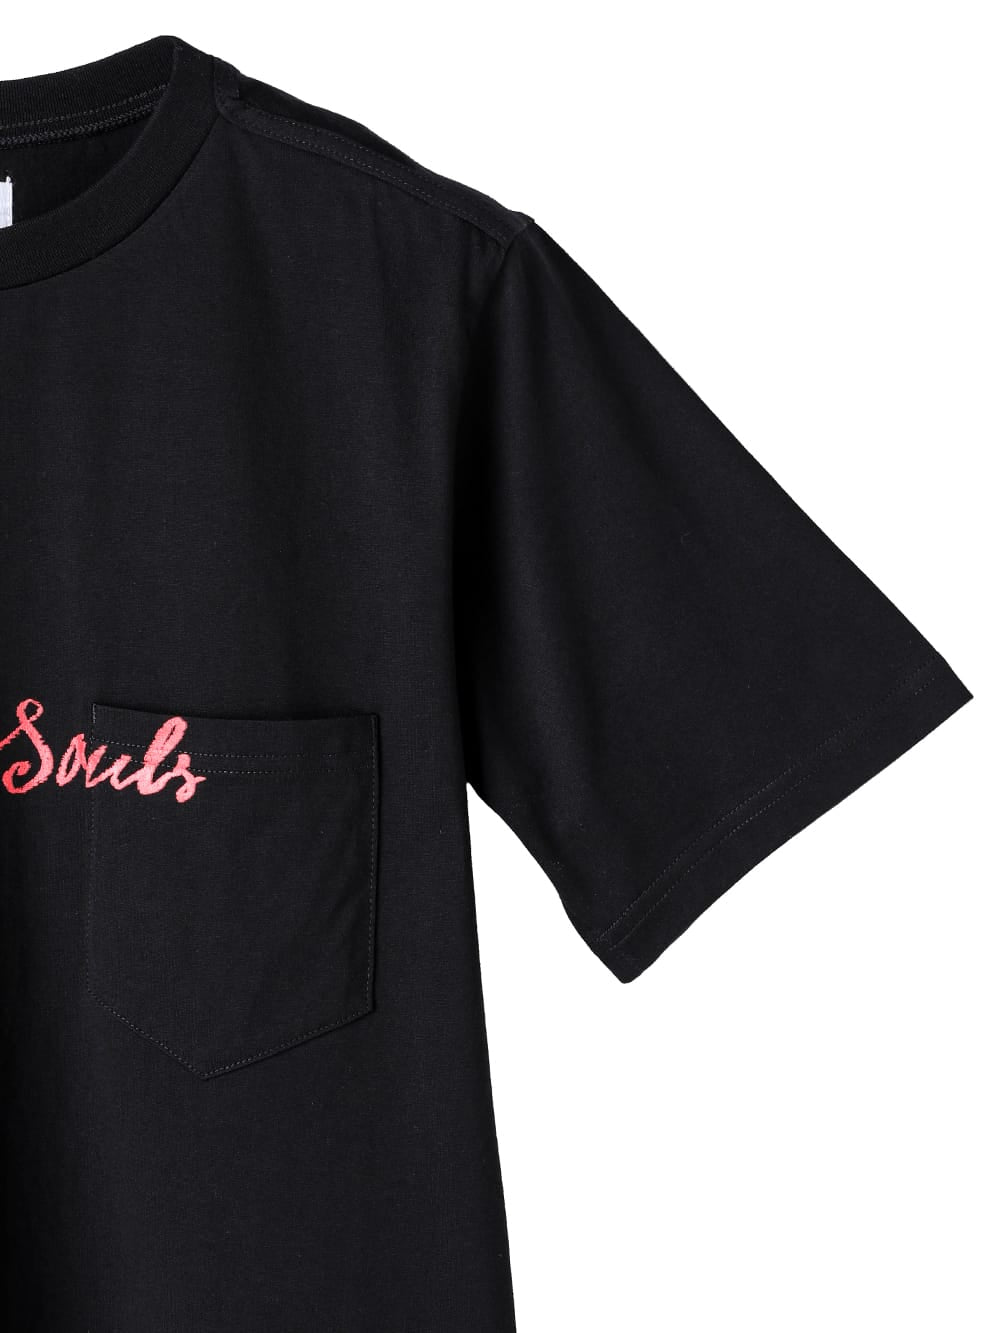 lonely souls. (s/s pocket tee)